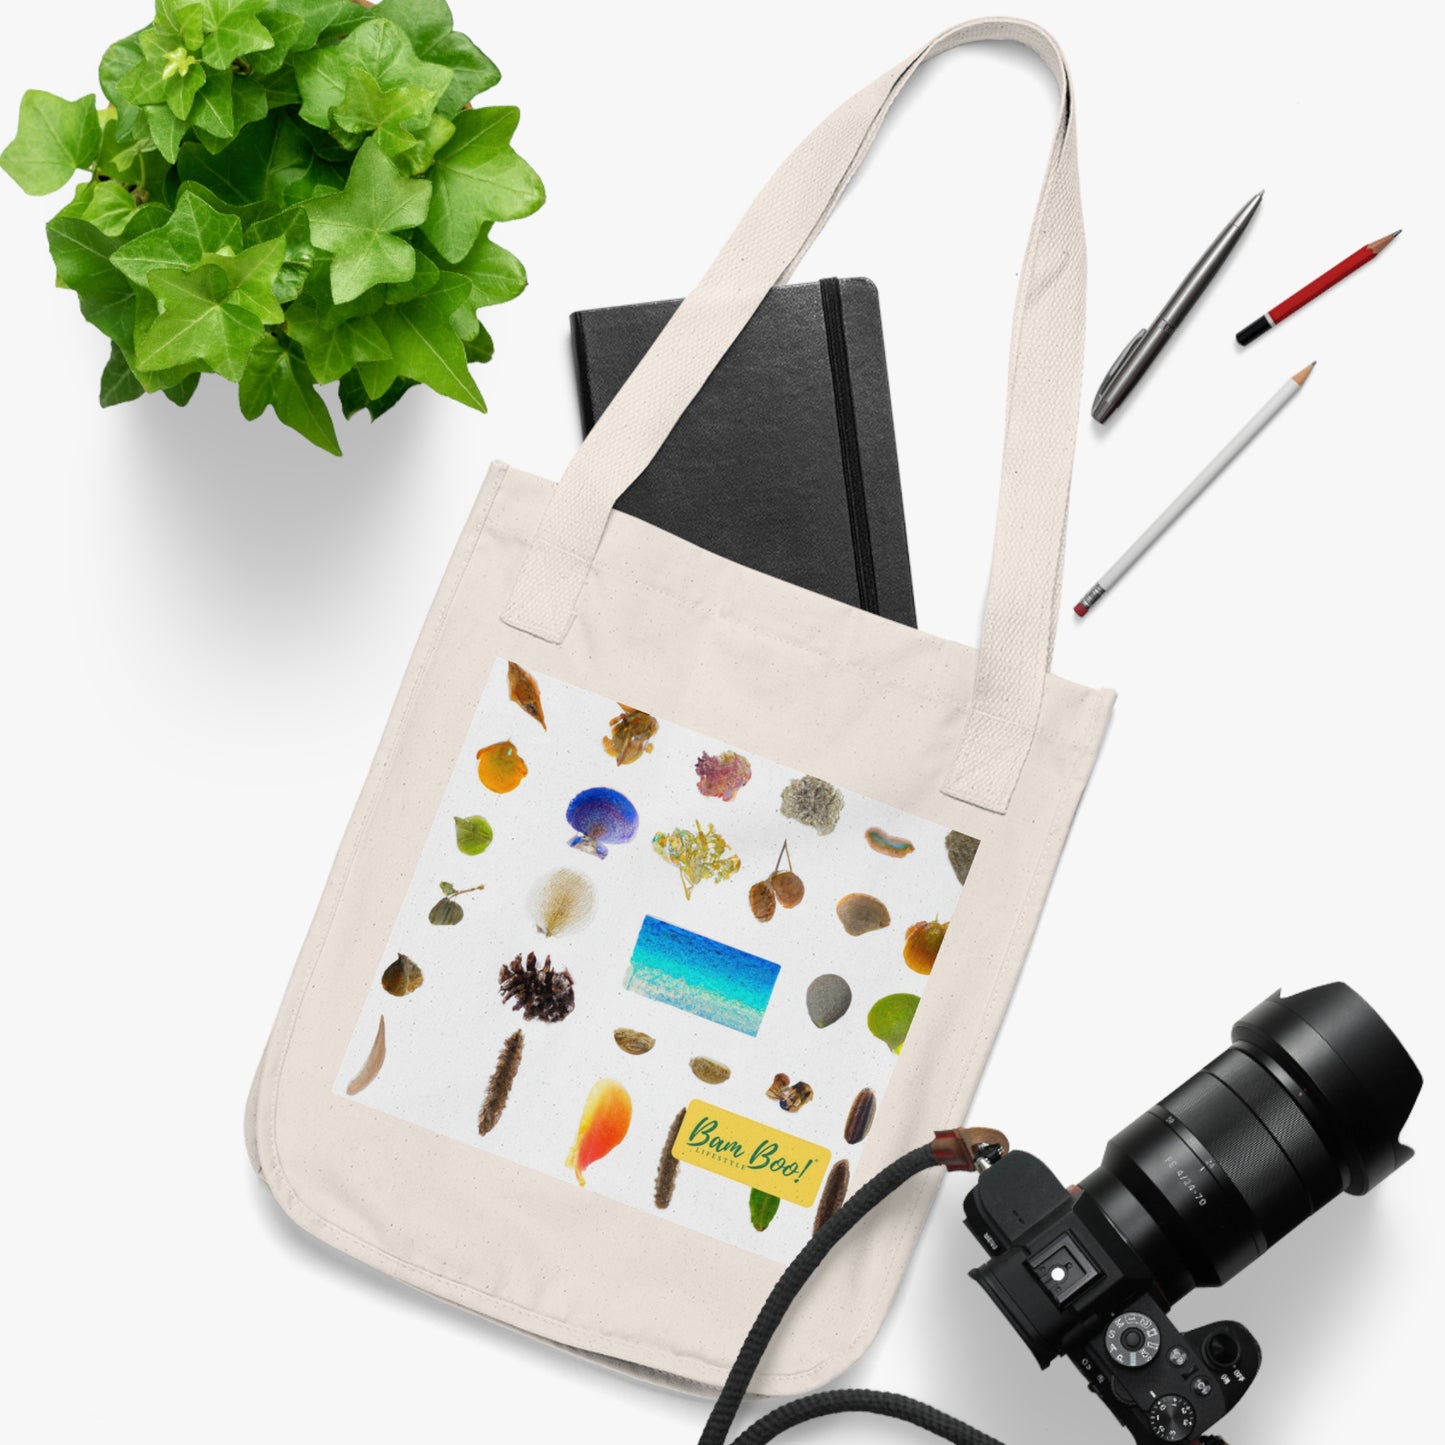 "The Art of my Life Story: A Natural Narrative" - Bam Boo! Lifestyle Eco-friendly Tote Bag